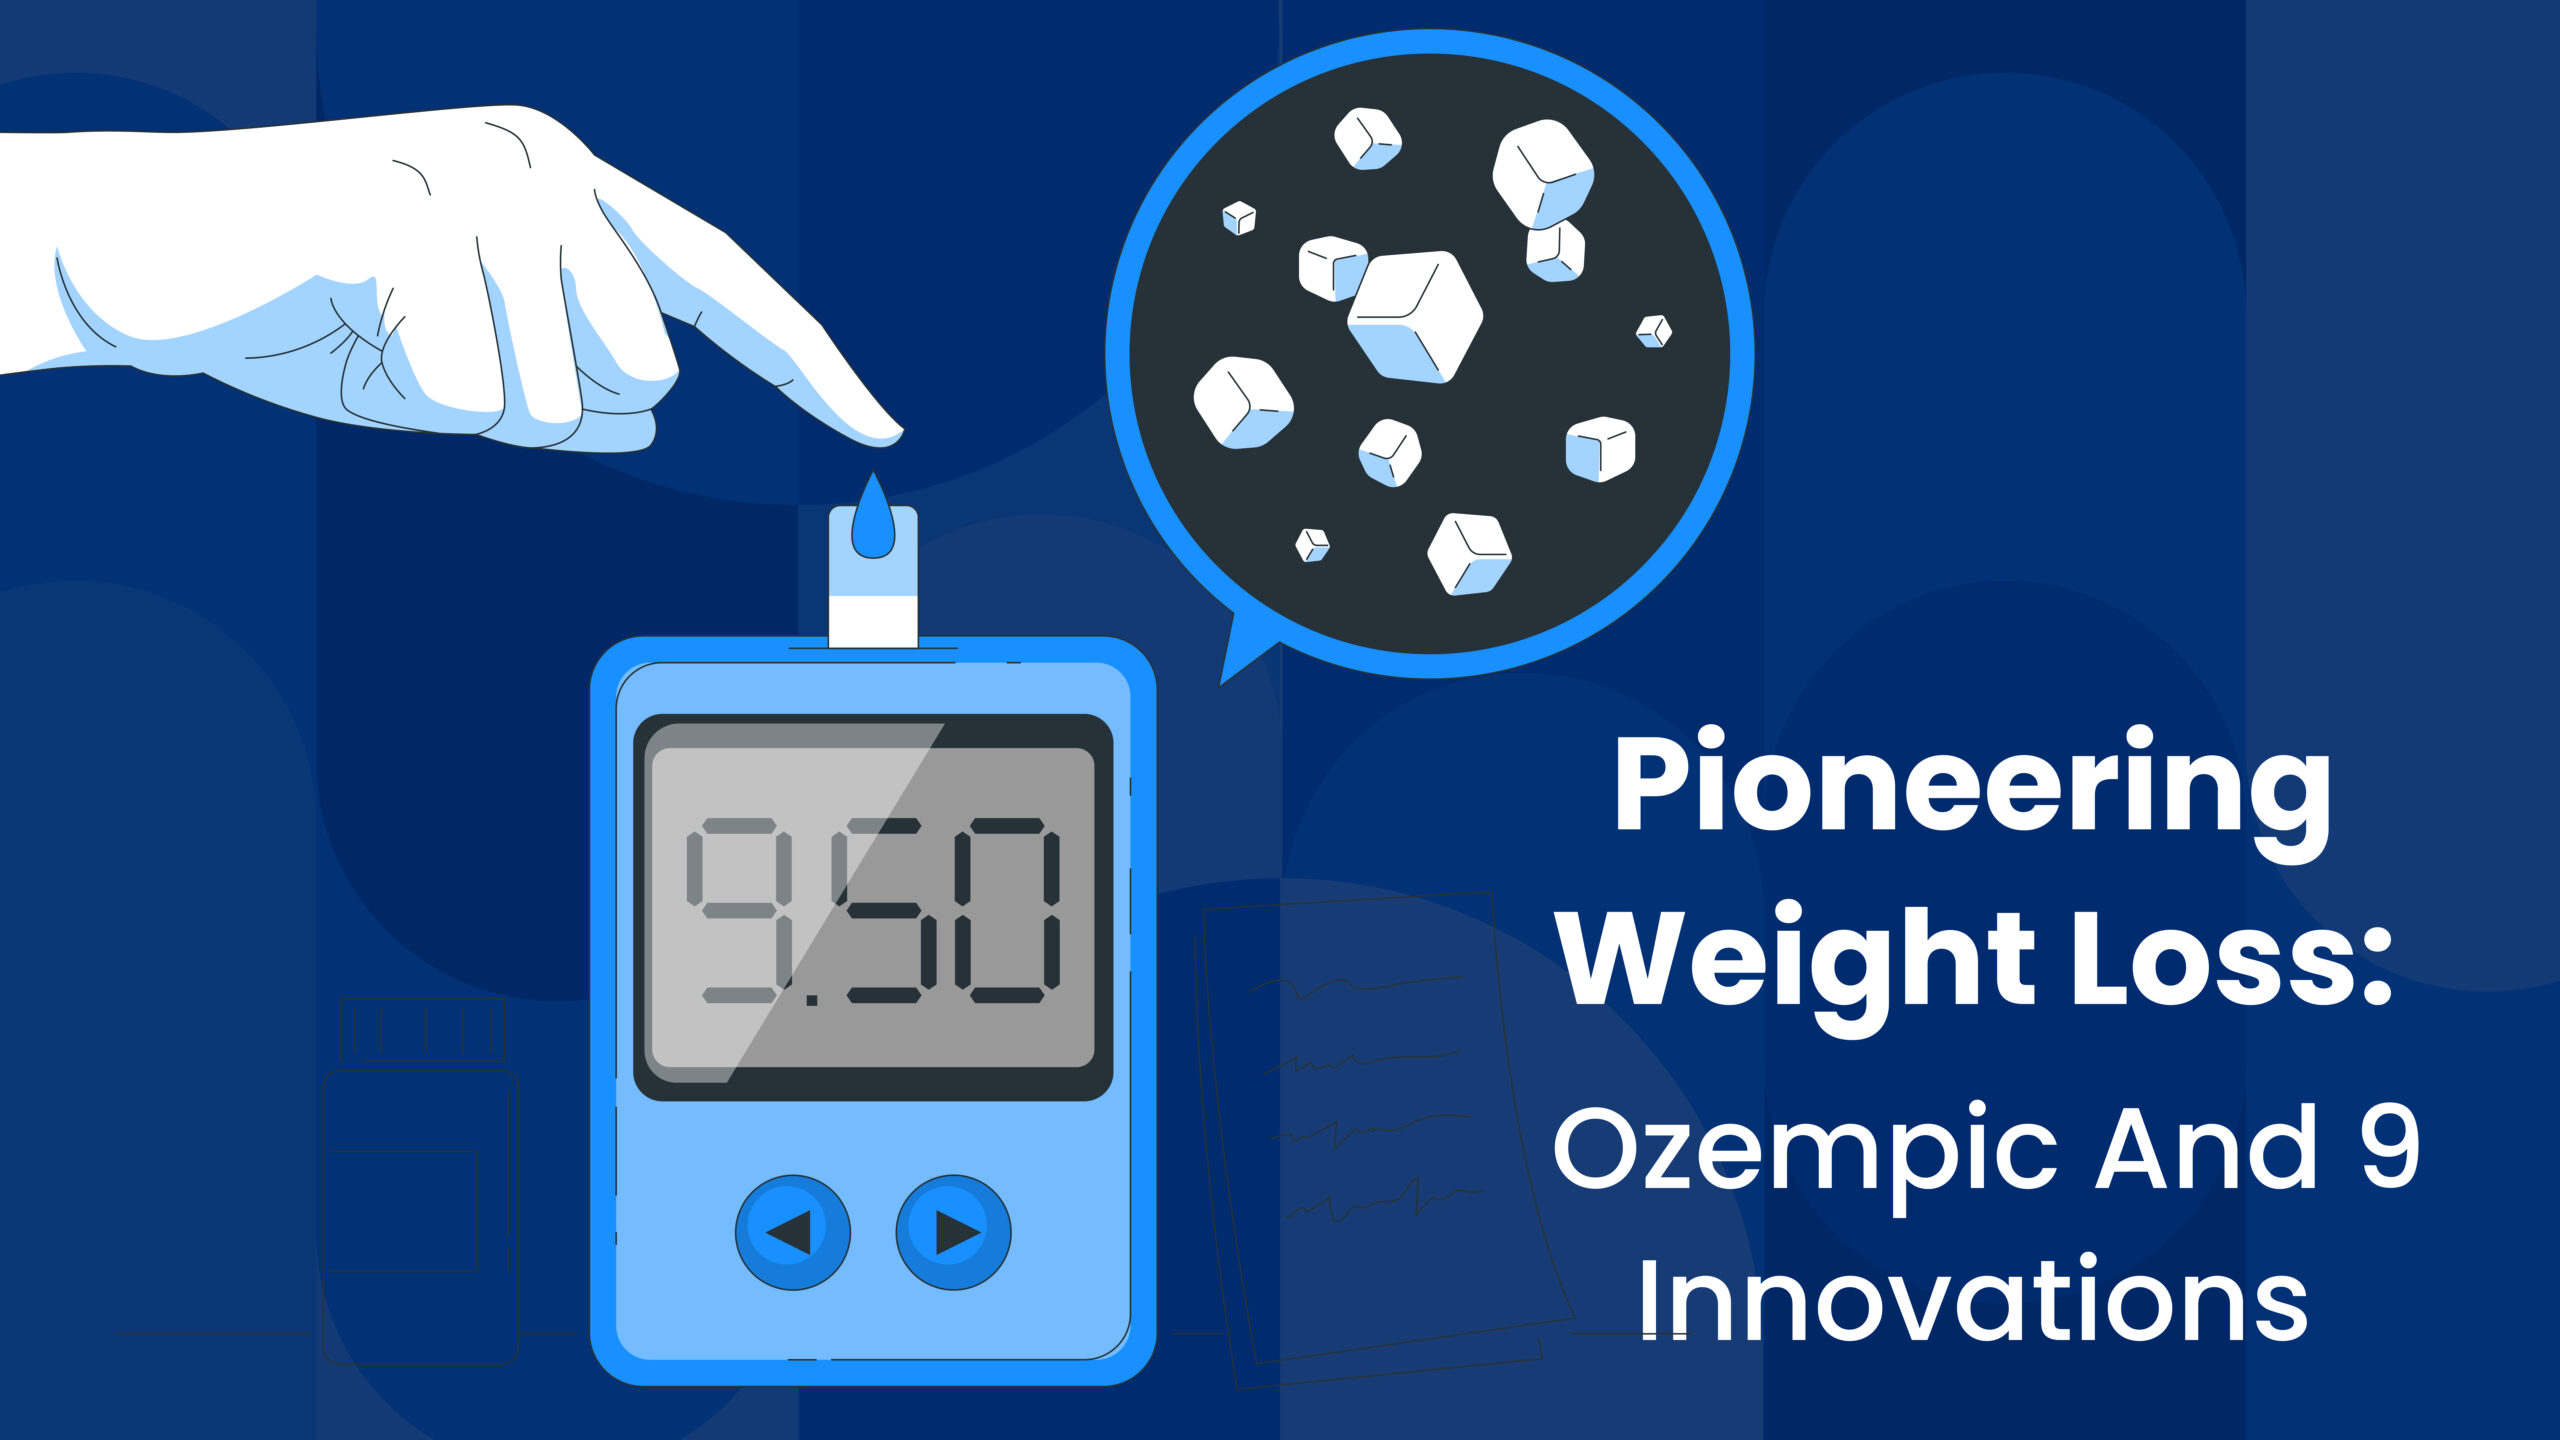 Is there a magic pill? Ozempic and 9 other potential weight loss innovations